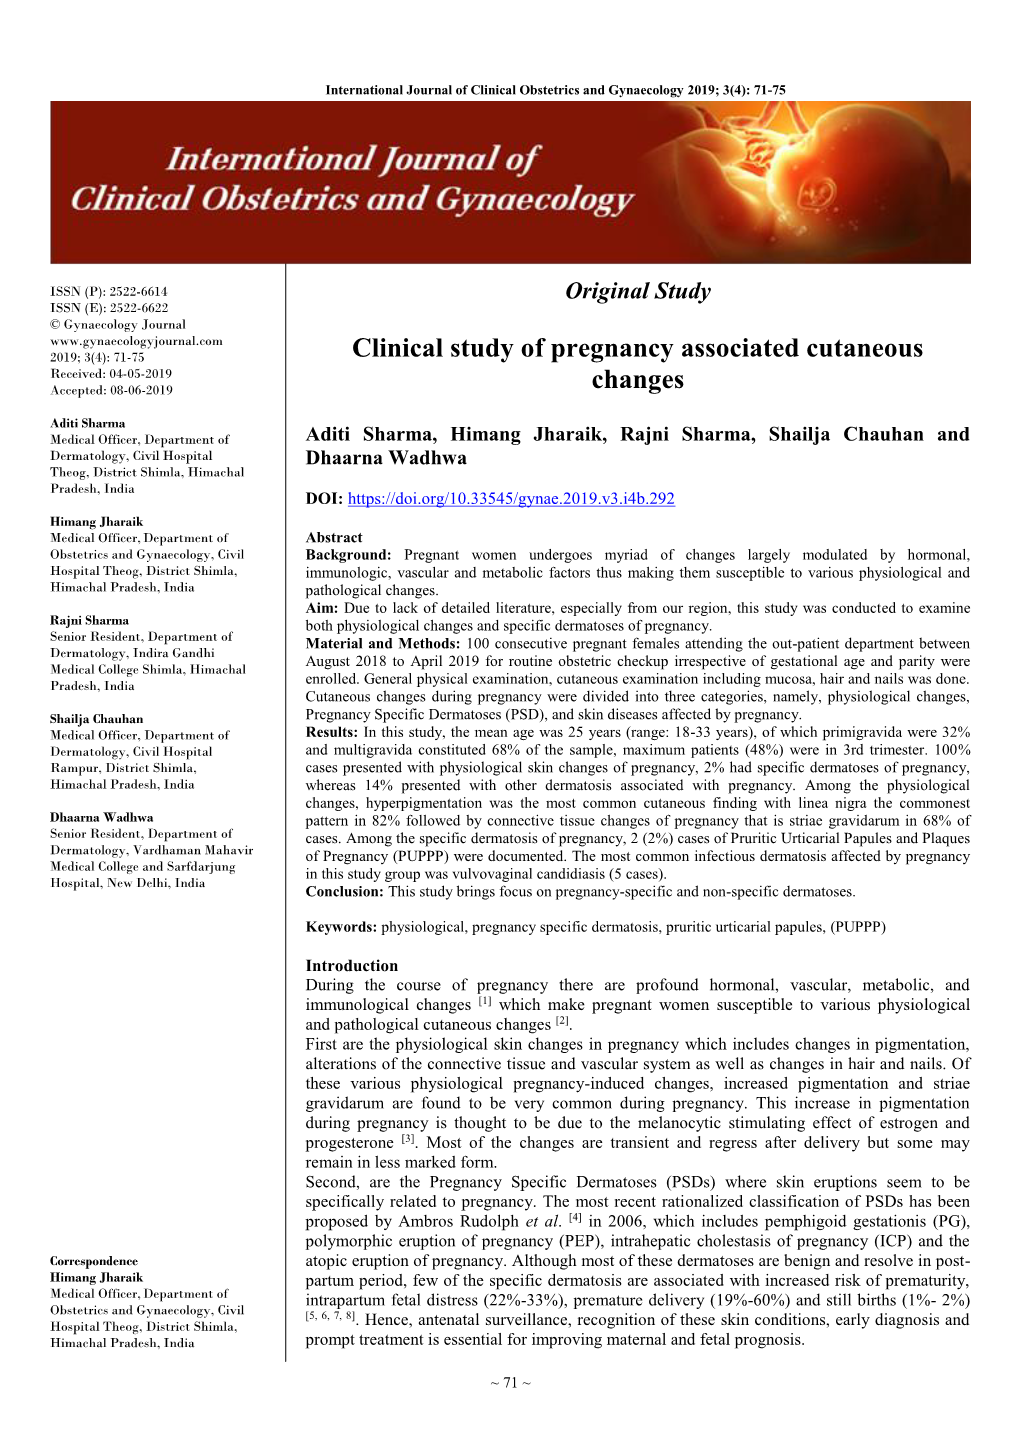 Clinical Study of Pregnancy Associated Cutaneous Changes